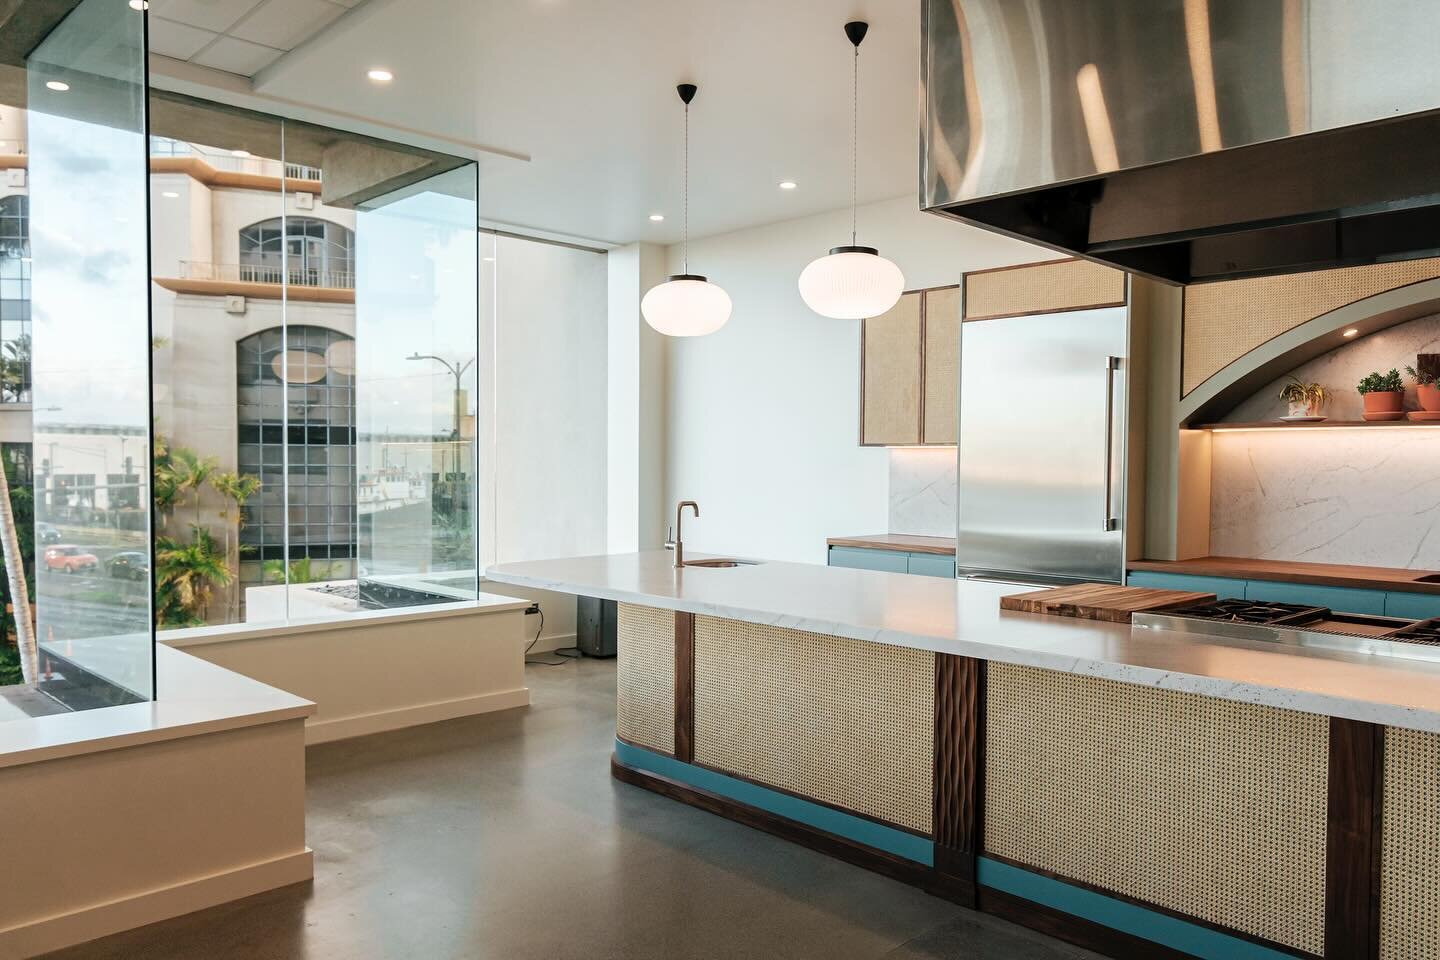 Welcome to our state-of-the-art commercial kitchen &amp; event space where culinary dreams come to life! 
Our fully equipped kitchens are now available for rent, 
providing a professional space for aspiring chefs, food 
entrepreneurs, and culinary en